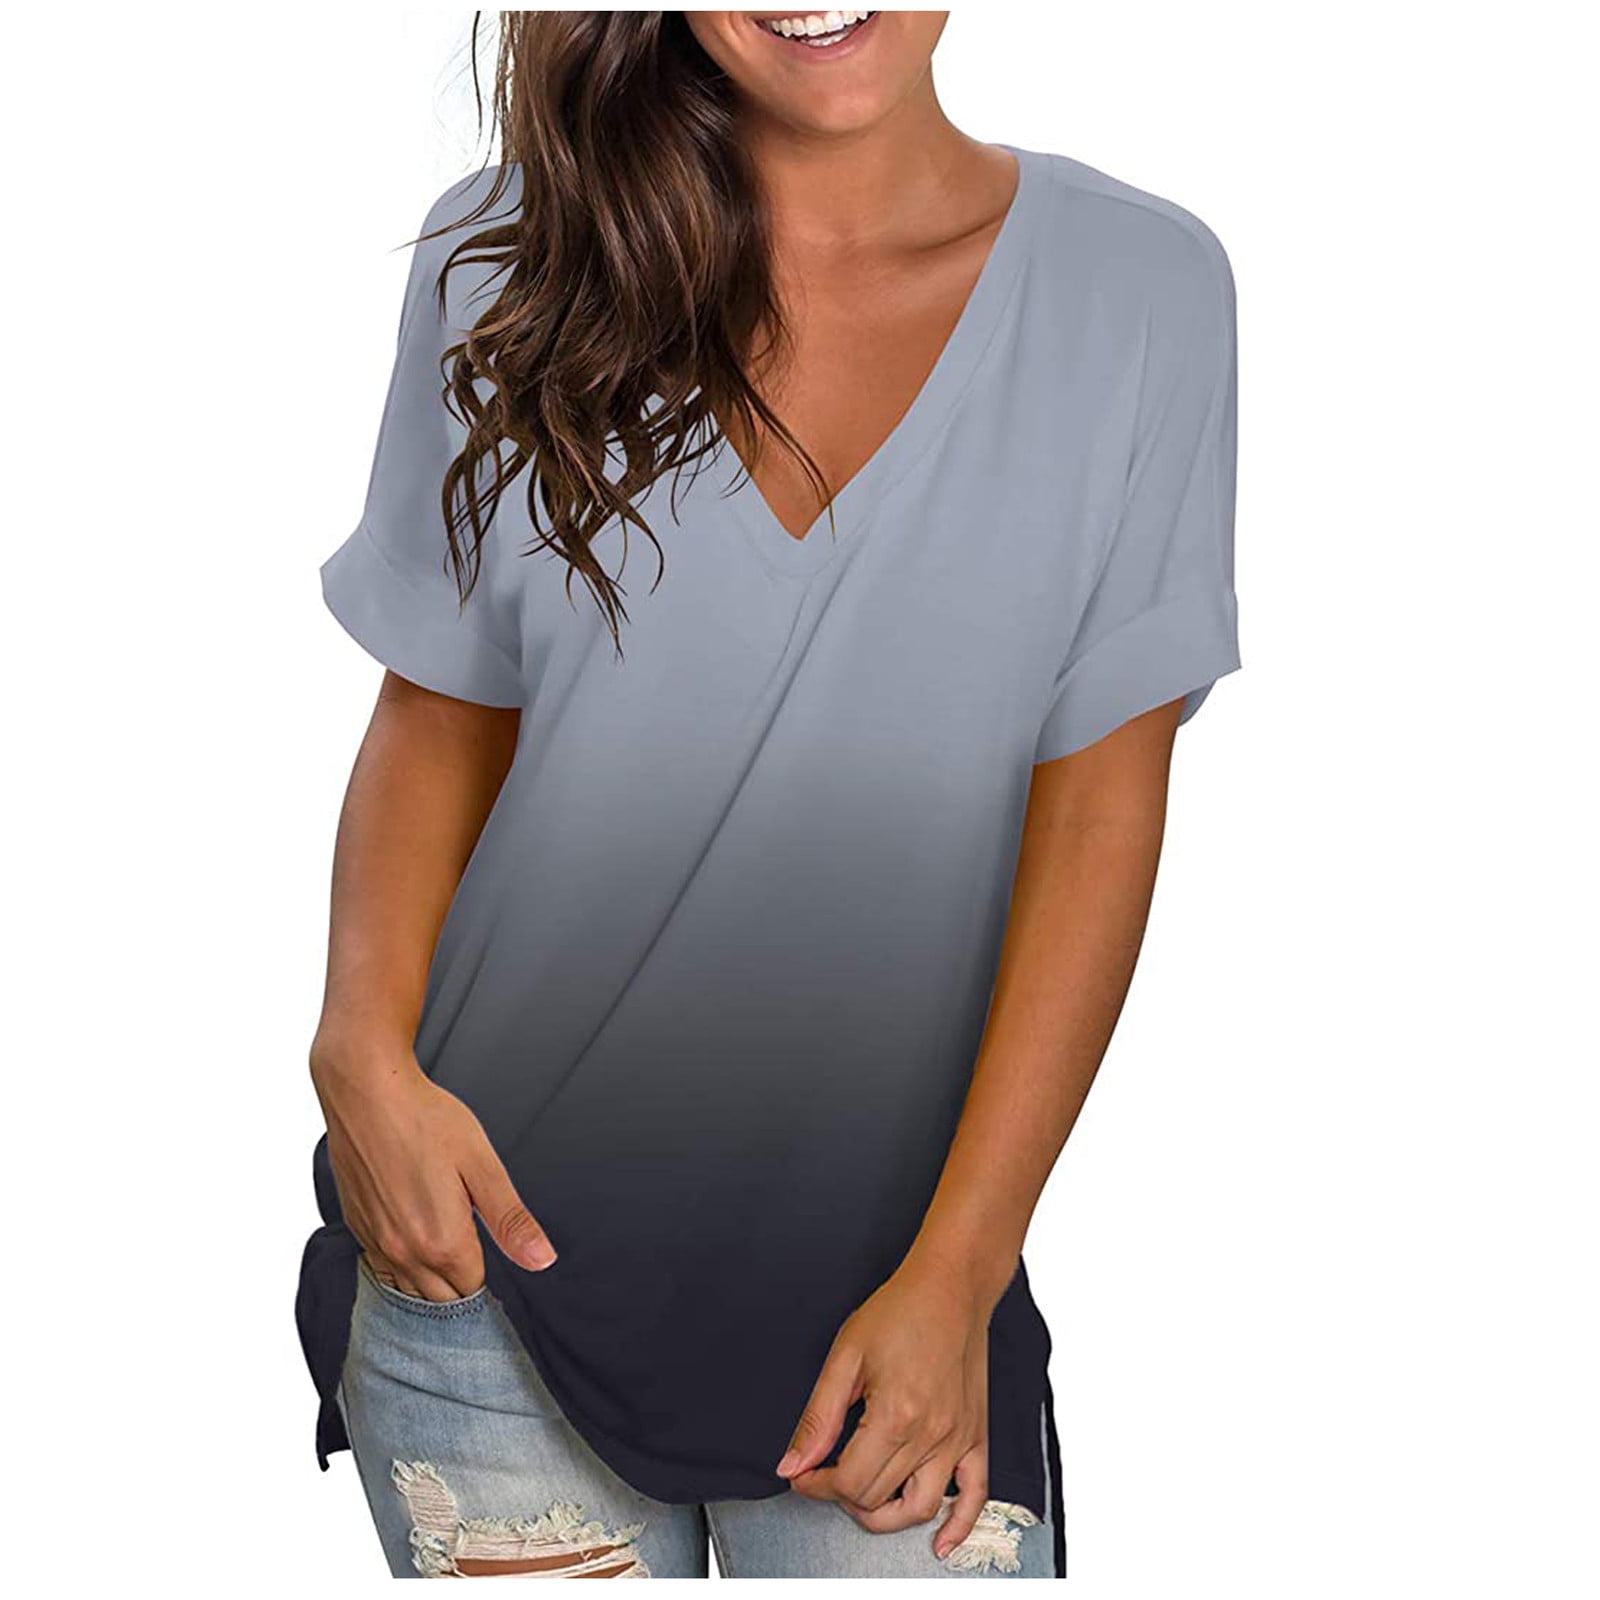 FABIURT Womens Summer Tops Women Casual V Neck Solid Color Printed T-Shirt Short Sleeve Tunic Blouse Comfy Summer Tops 